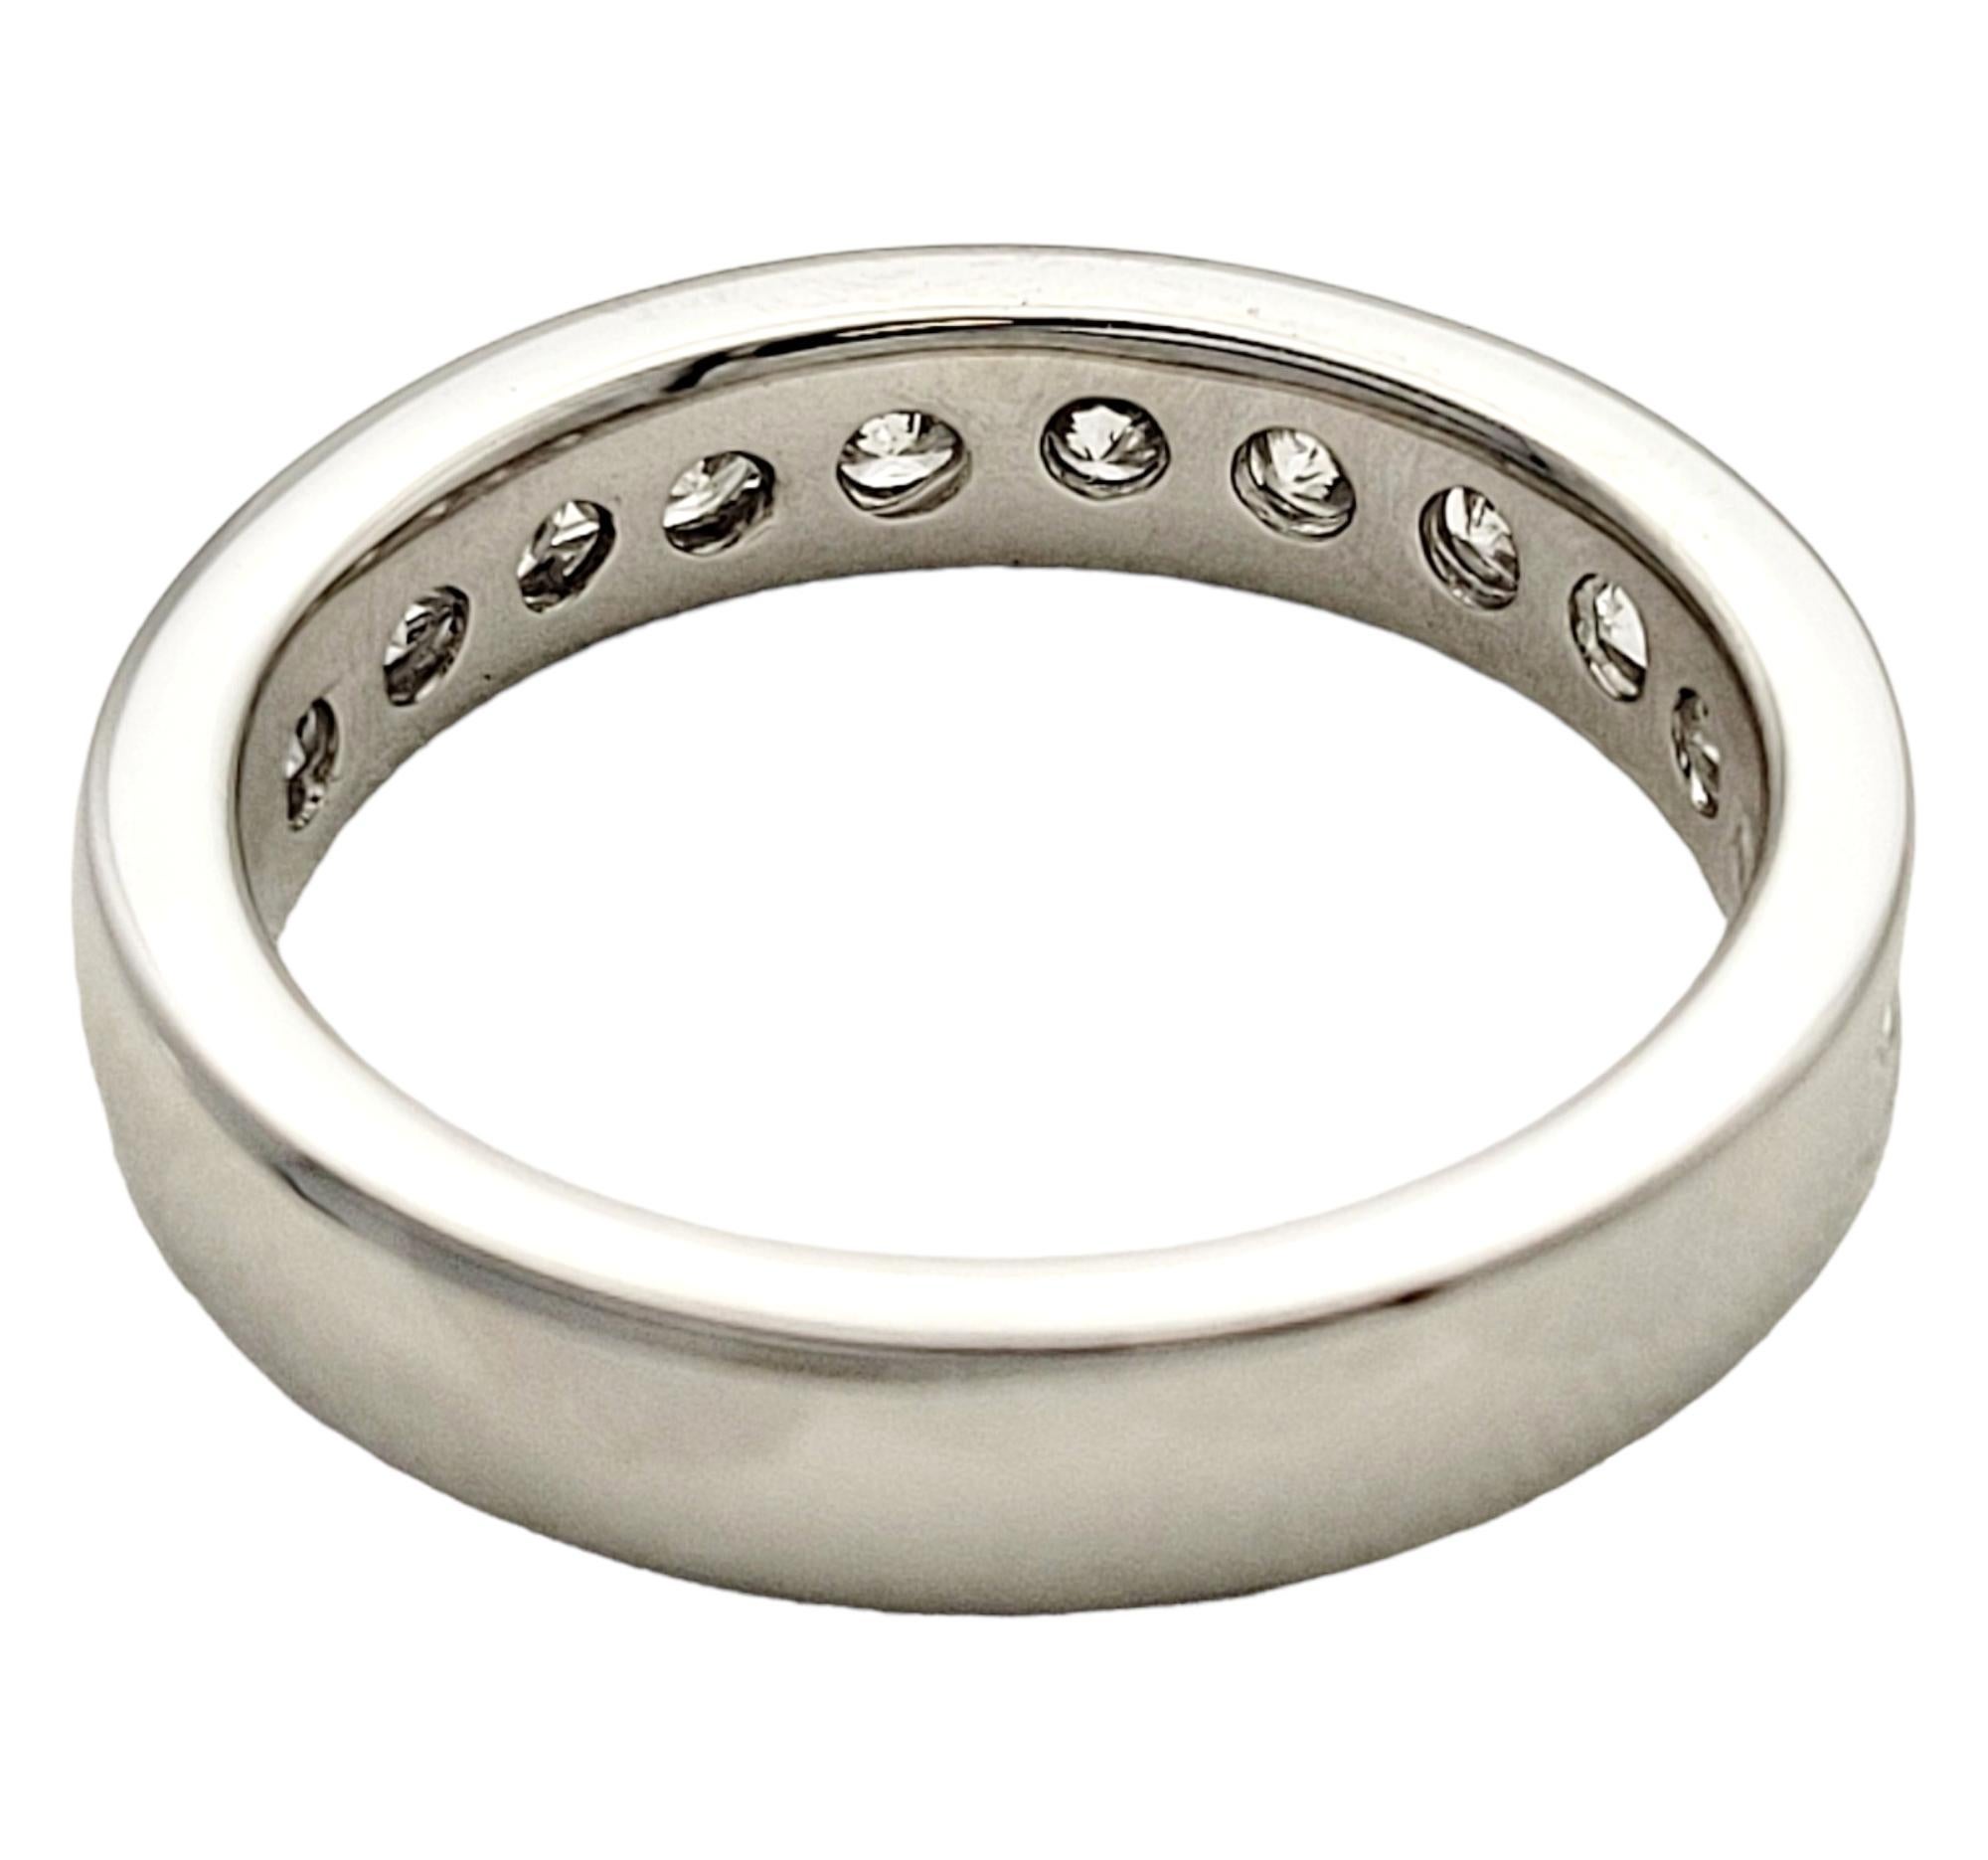 0.90 Carat Total Round Diamond Semi-Eternity Band Ring in Platinum In Good Condition For Sale In Scottsdale, AZ